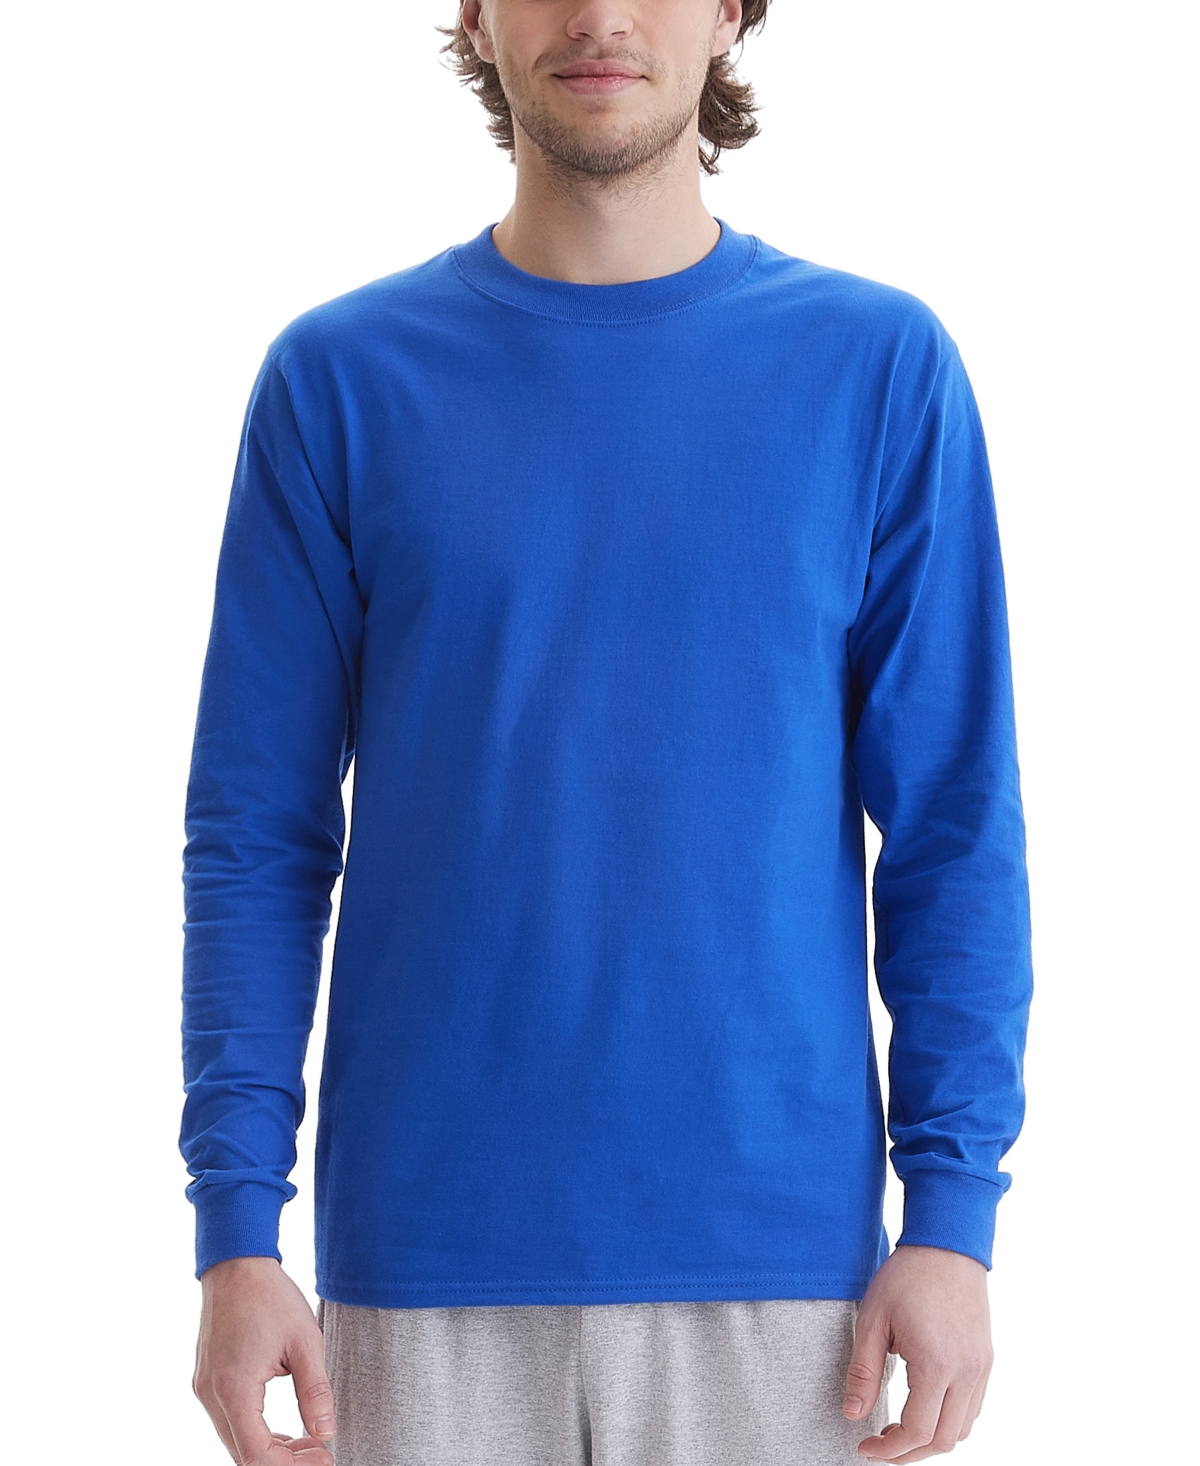 Hanes Beefy-t Unisex Long-sleeve T-shirt, 2-pack In Royal